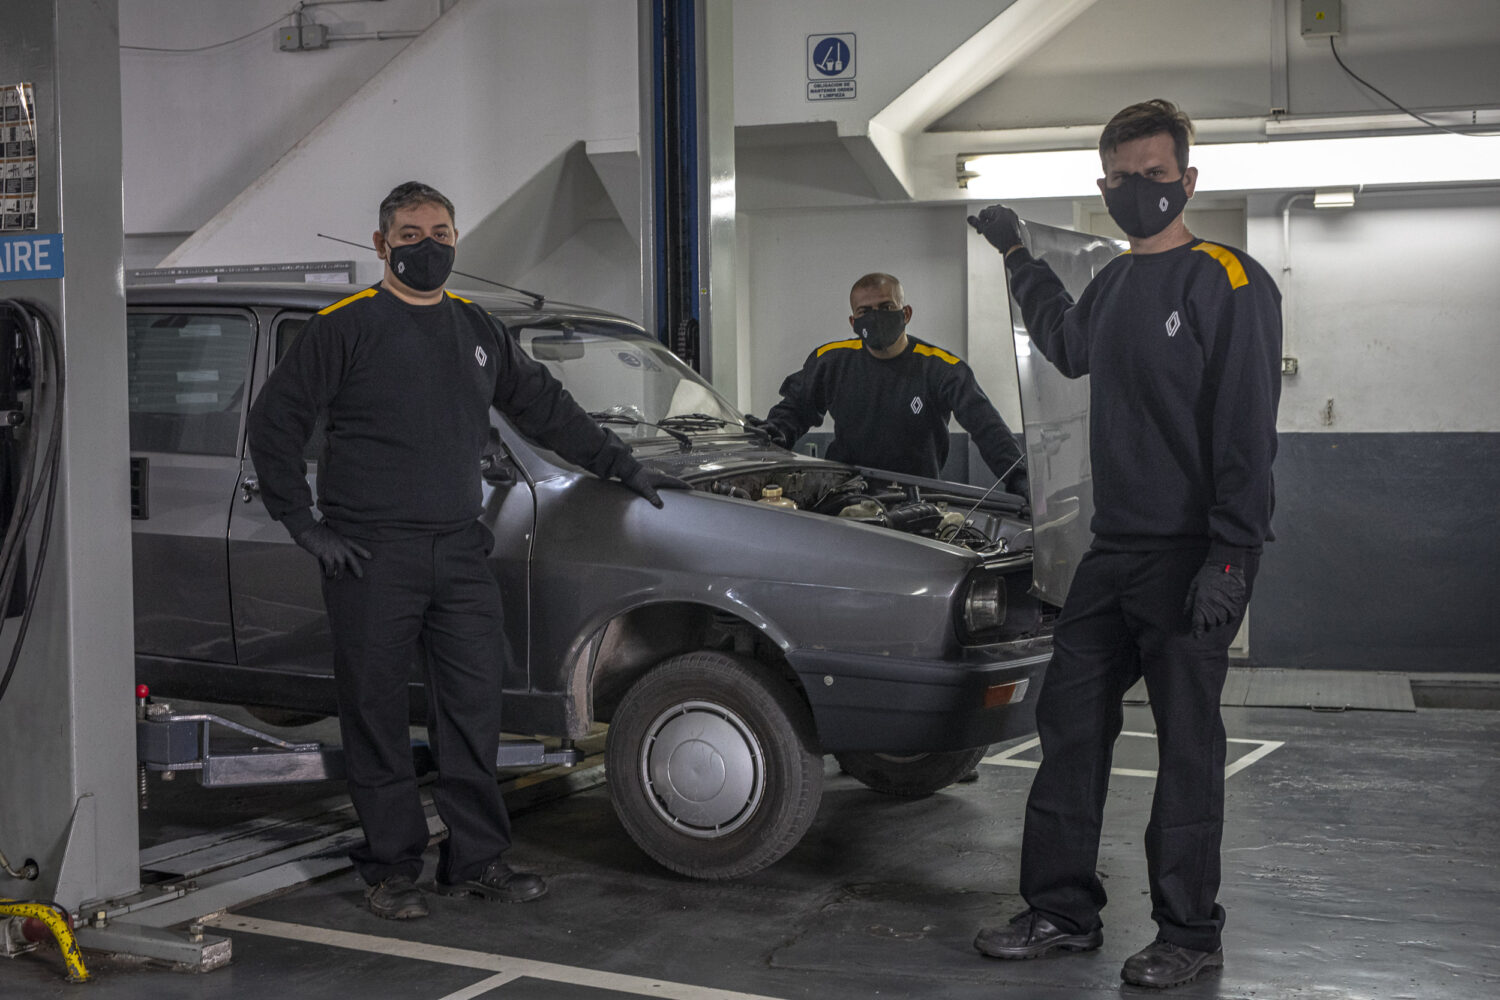 2022 - Story Renault - The old man, the Renault 12 and Renault care service: a touching story from Argentina